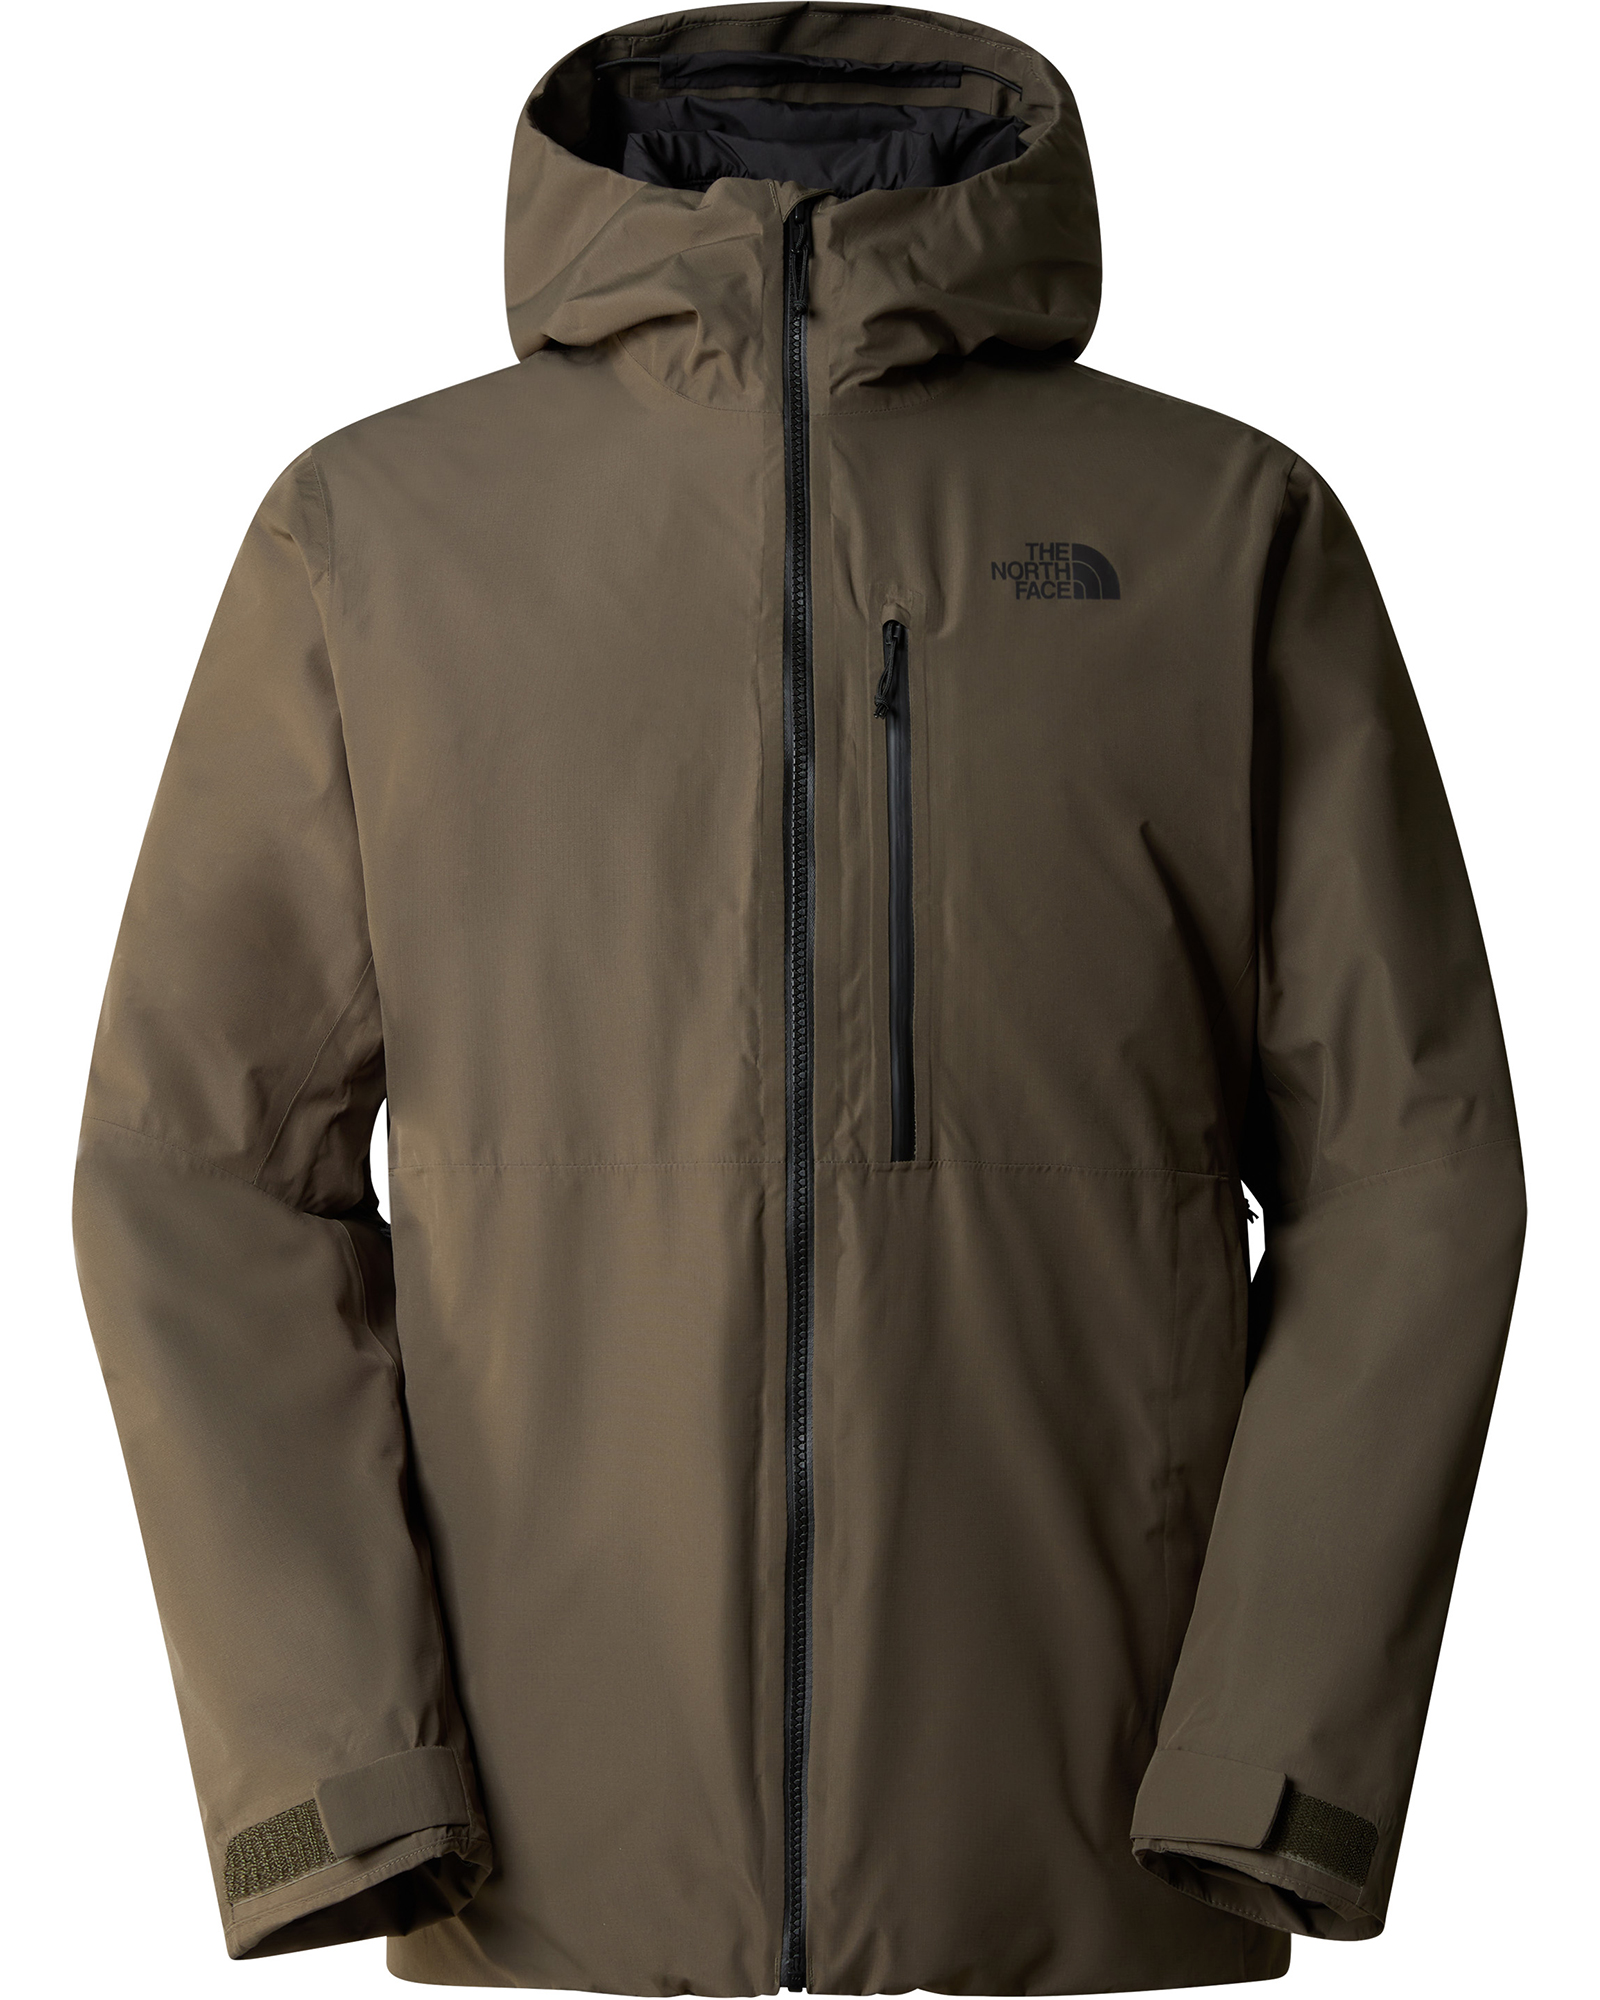 The North Face Men’s North Table Down Triclimate Jacket - New Taupe Green-TNF Black L